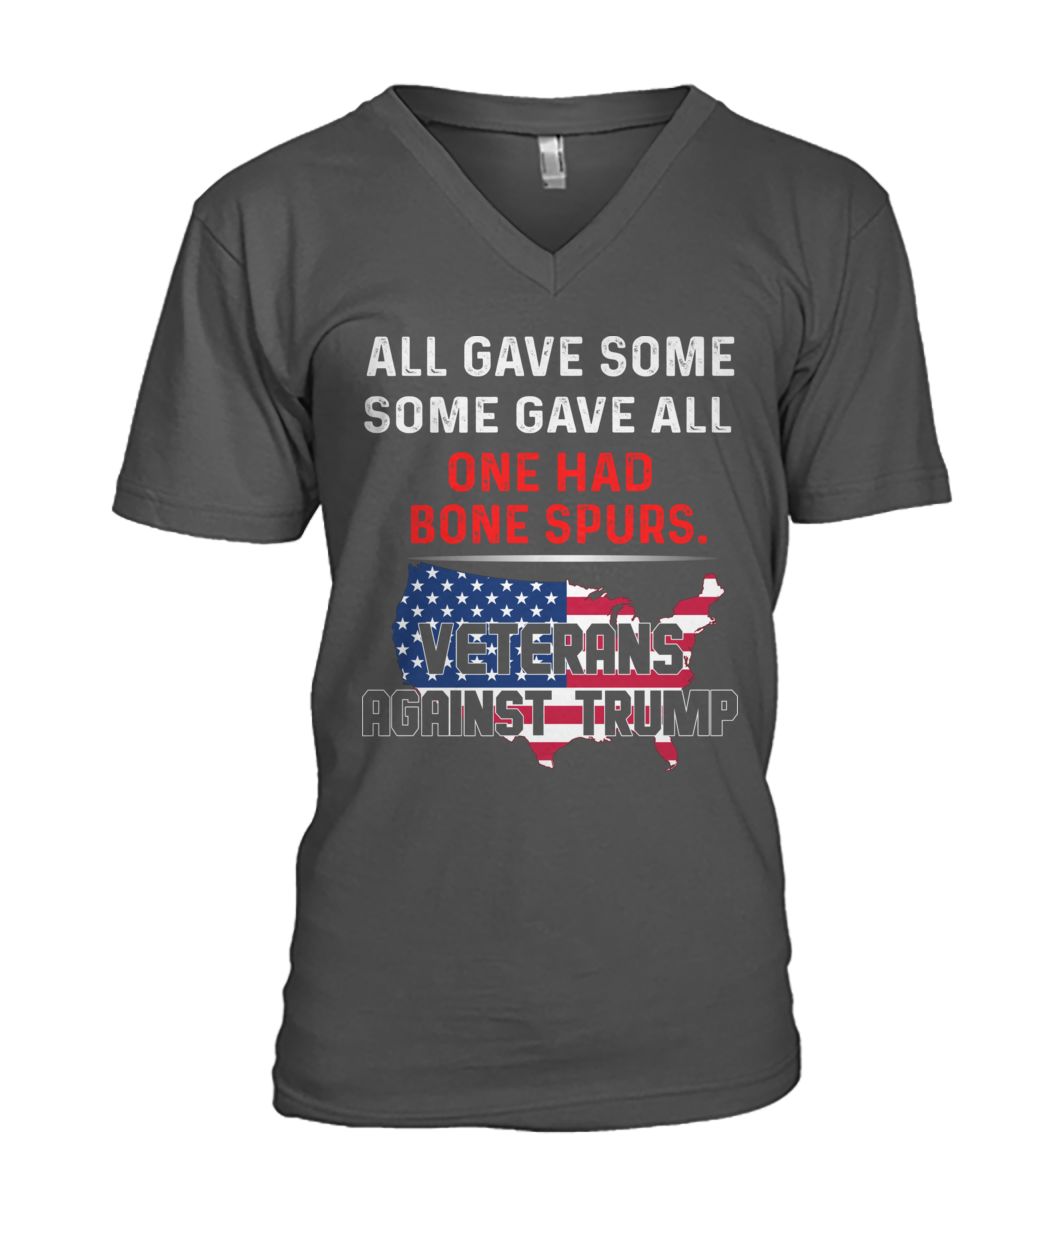 All gave some gave all one had bone spurs veterans against trump mens v-neck